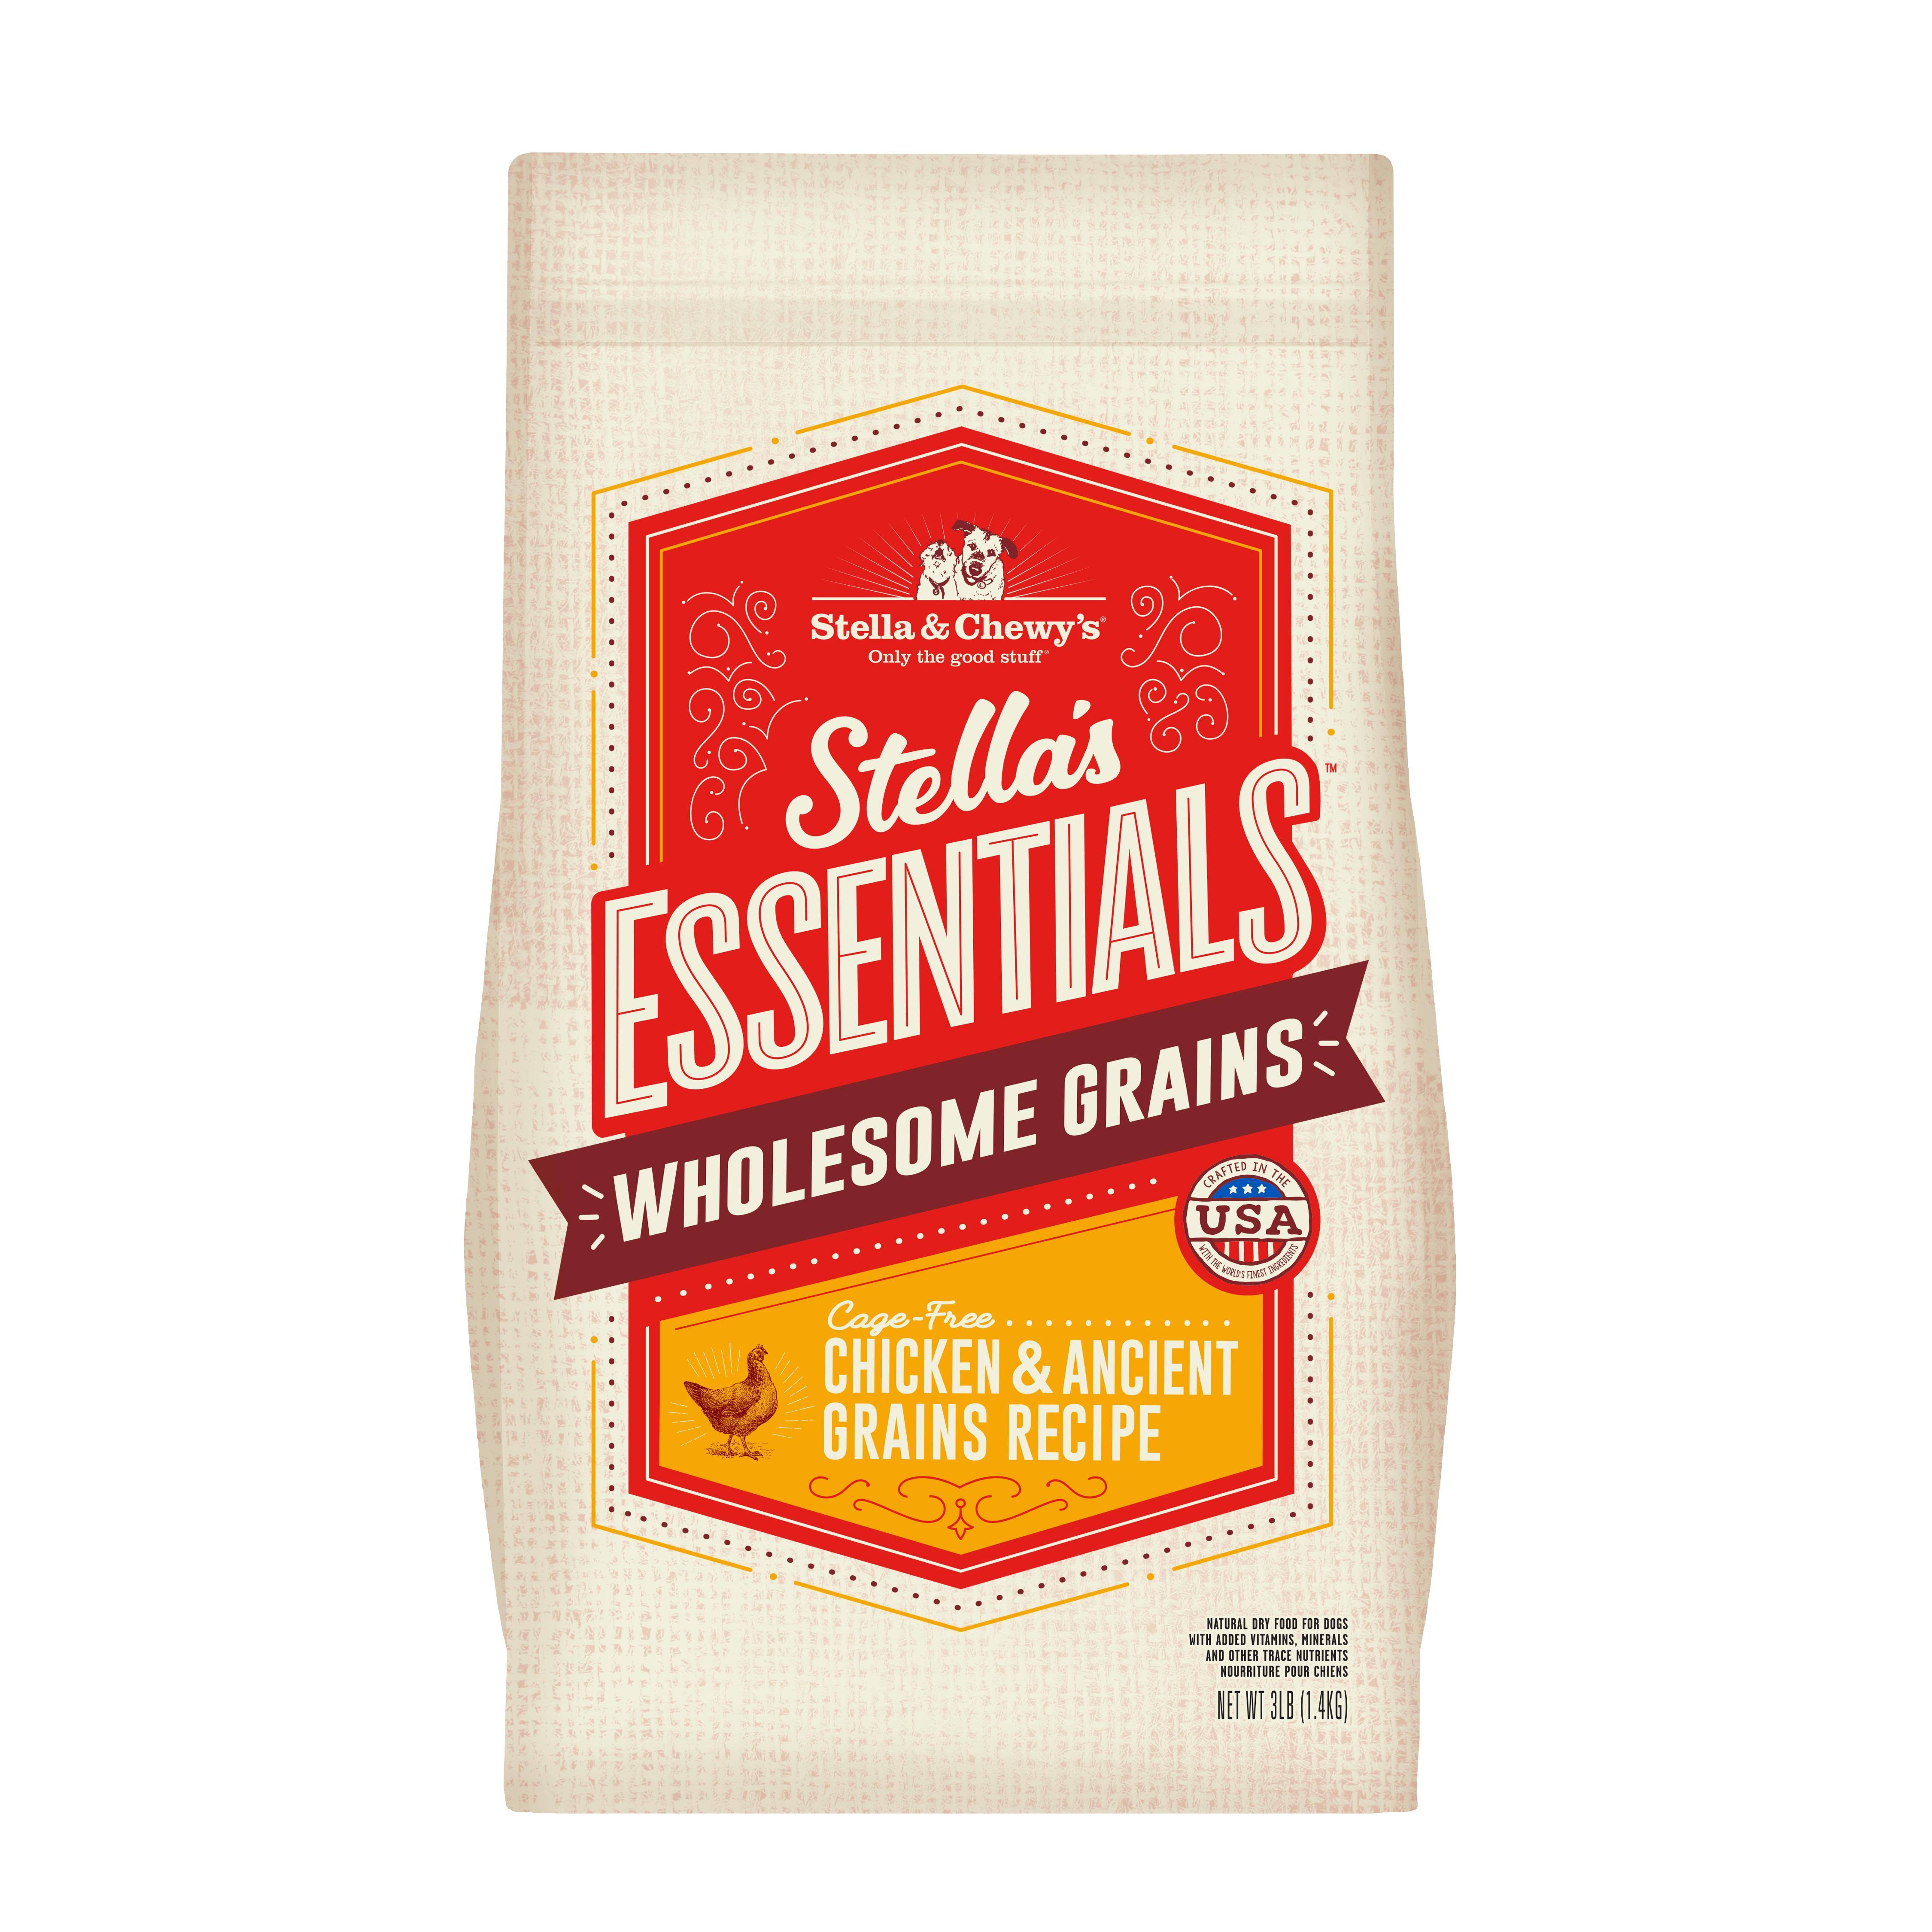 Stella & Chewy's Essentials Cage-Free Chicken & Ancient Grains Recipe Dog Food - 3-Lbs.